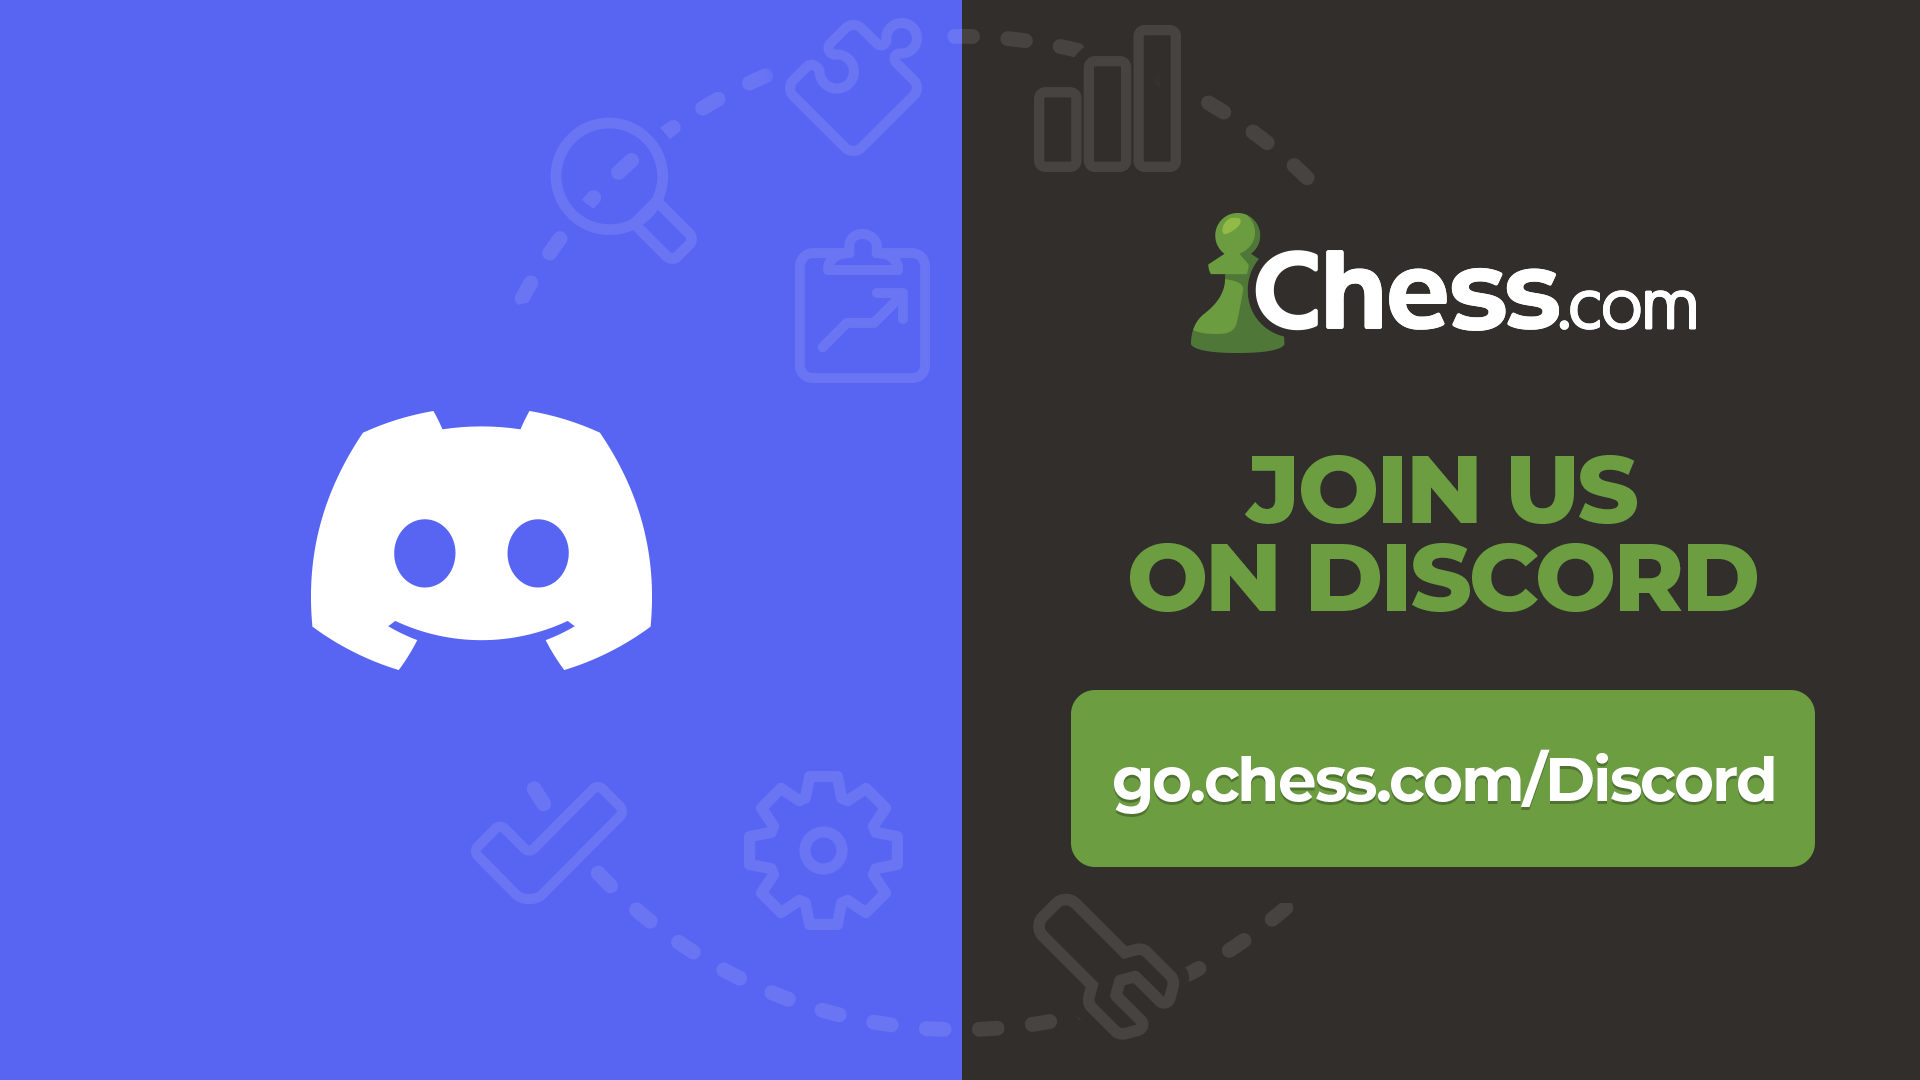 Announcing Exclusive Events And Updates On The Chess.com Discord